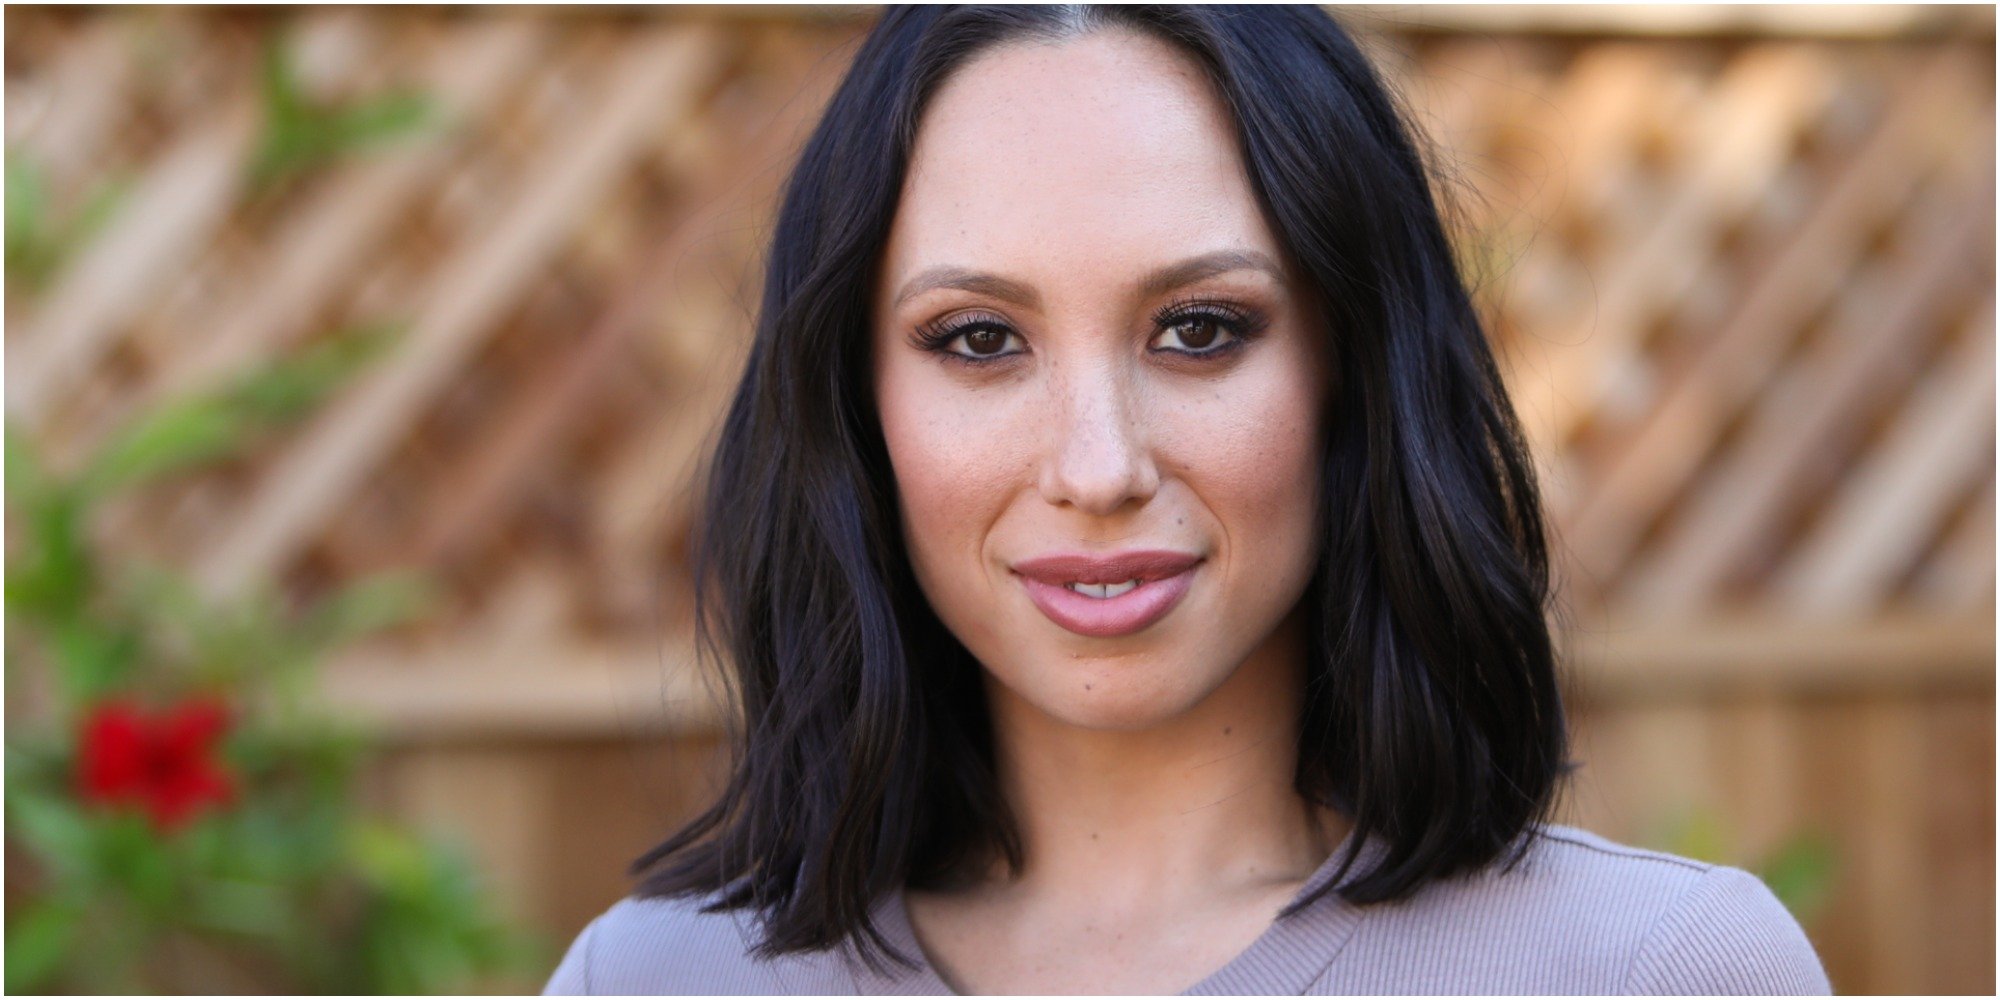 ‘Dancing with the Stars’: Cheryl Burke Felt ‘Hopeless’ After COVID-19 Diagnosis